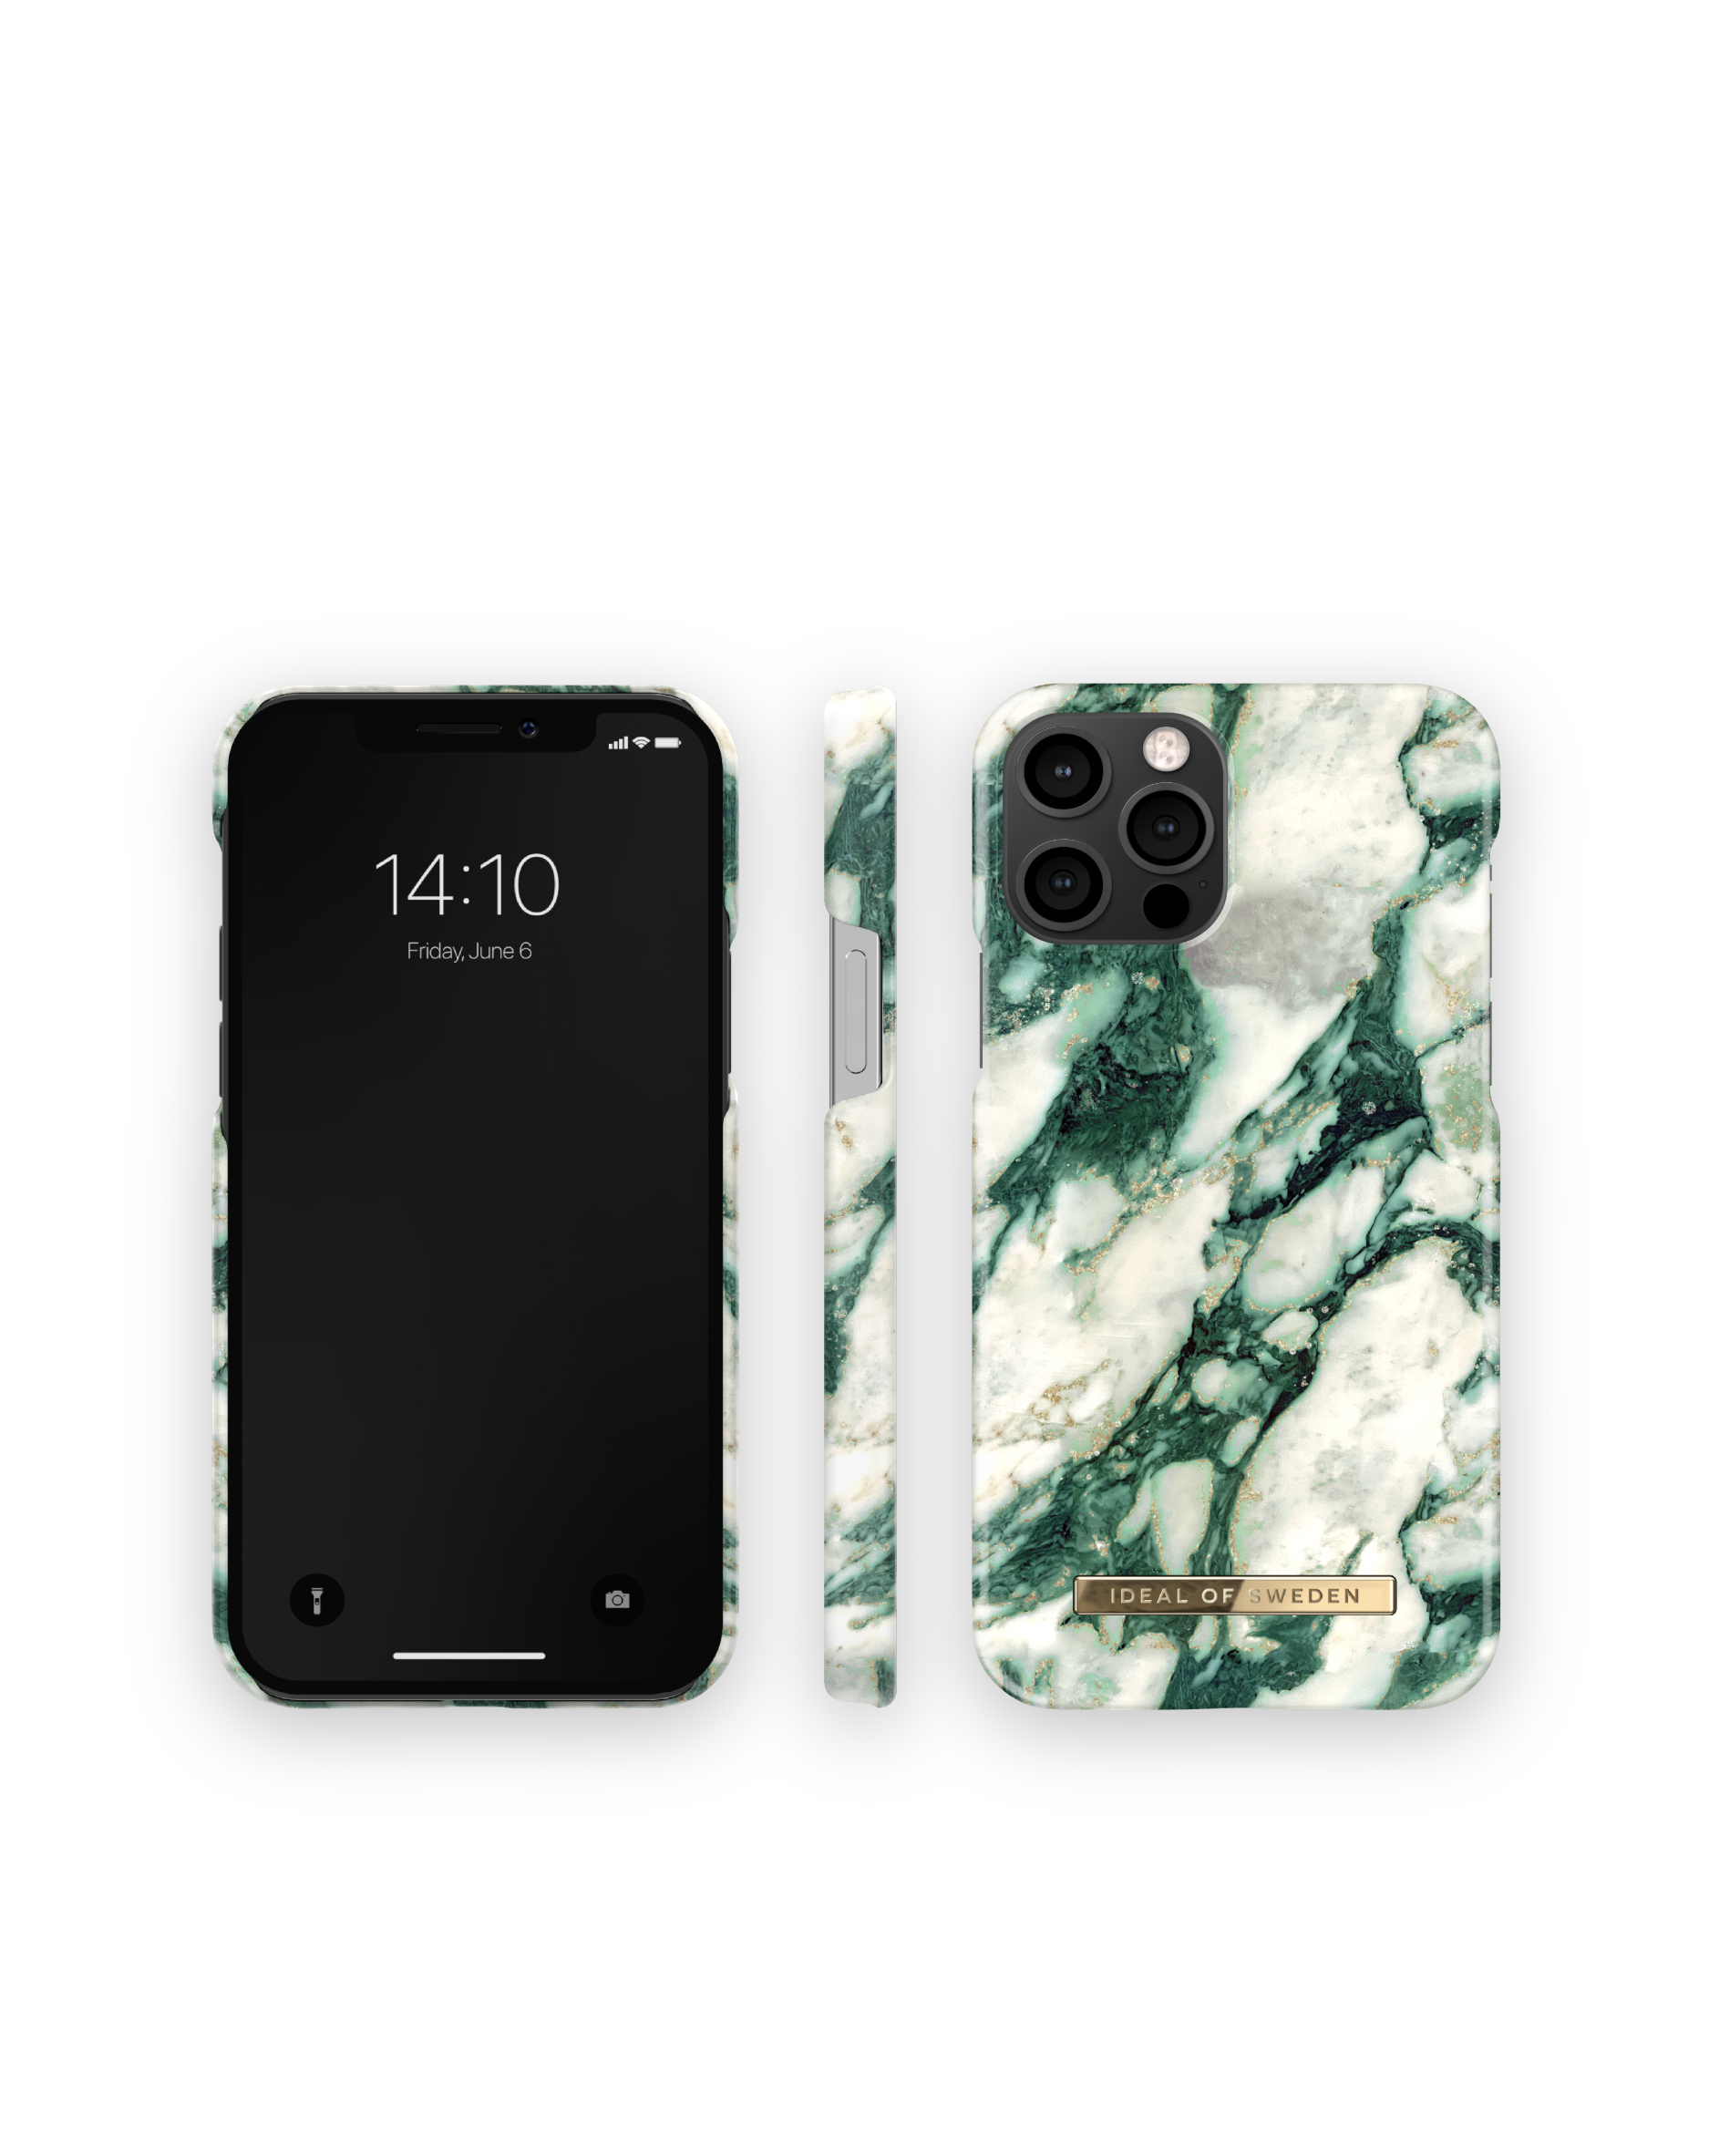 12/12 Apple, Calacatta IDEAL OF Emerald SWEDEN IDFCMR21-I2061-379, iPhone Pro, Backcover, Marble